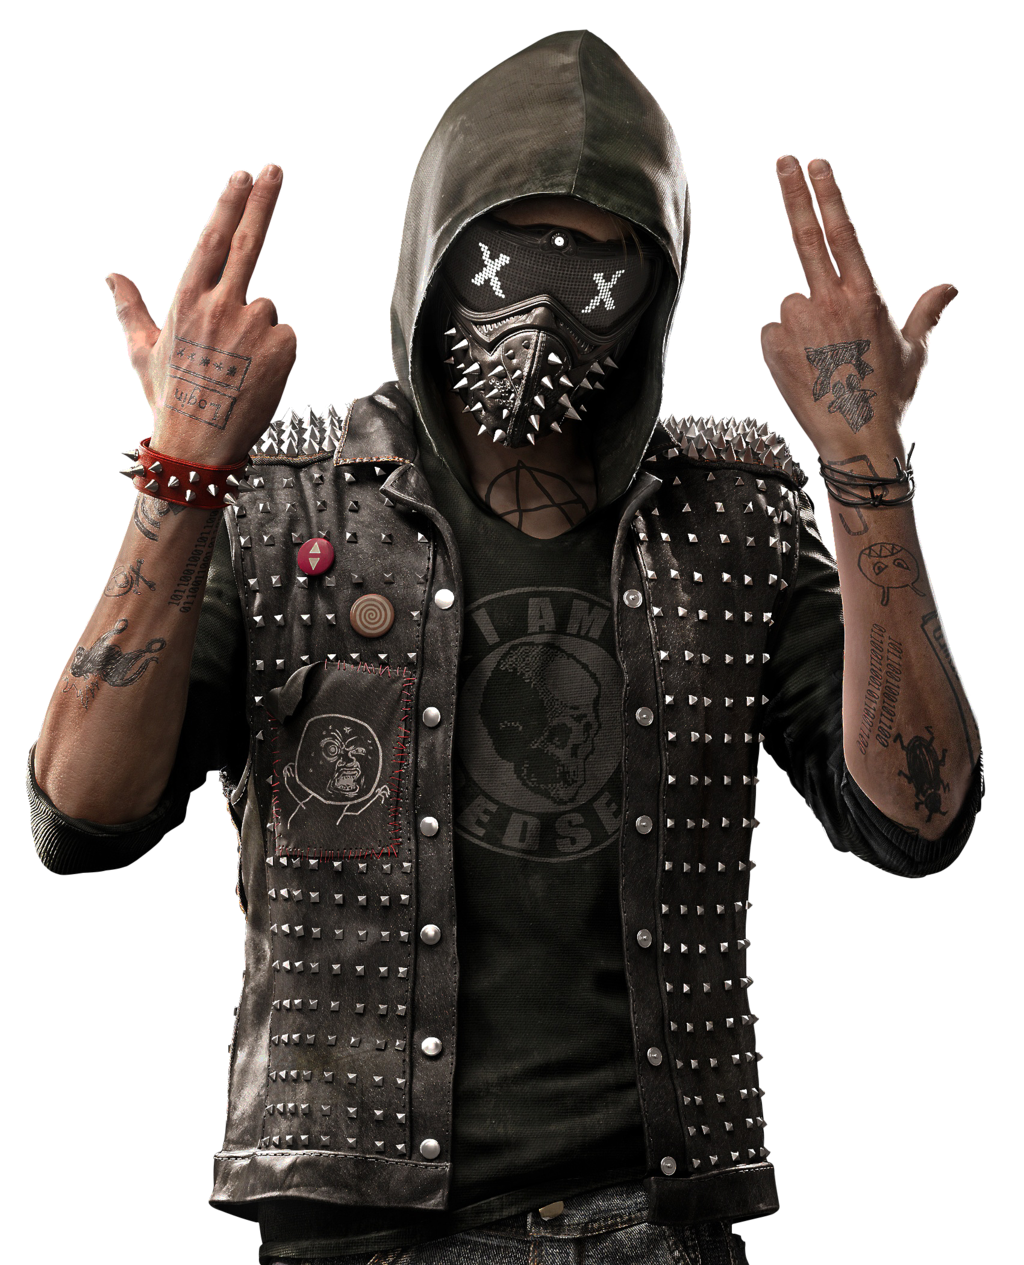 Watch Dogs 2 Marcus Holloway 